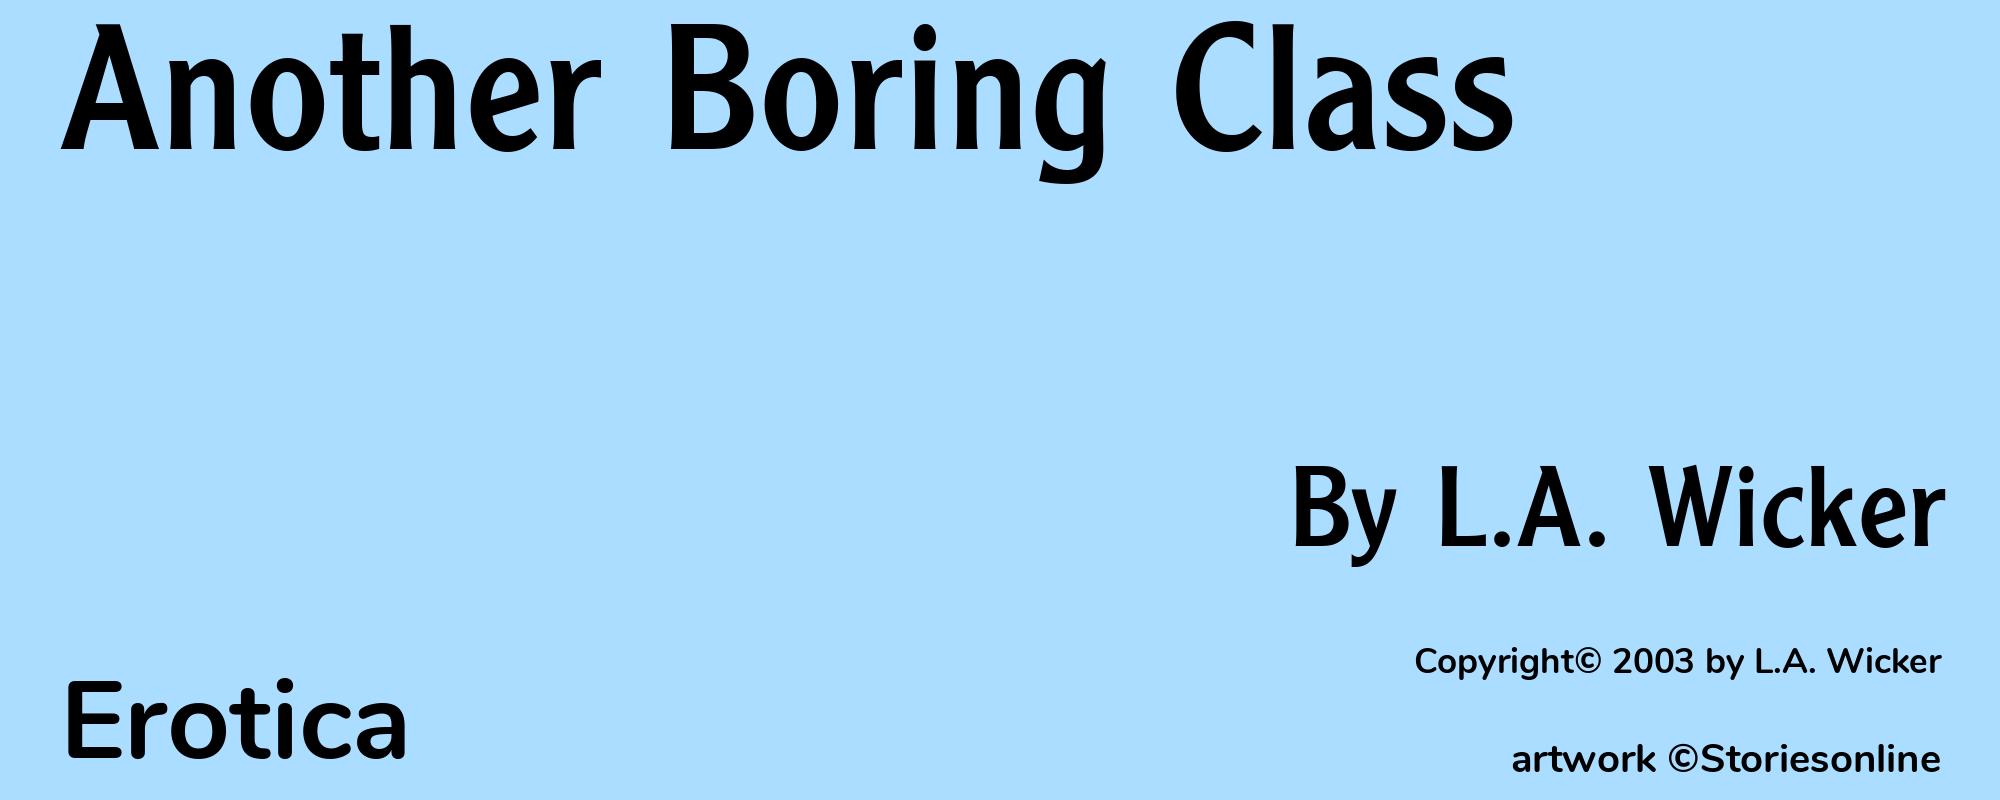 Another Boring Class - Cover